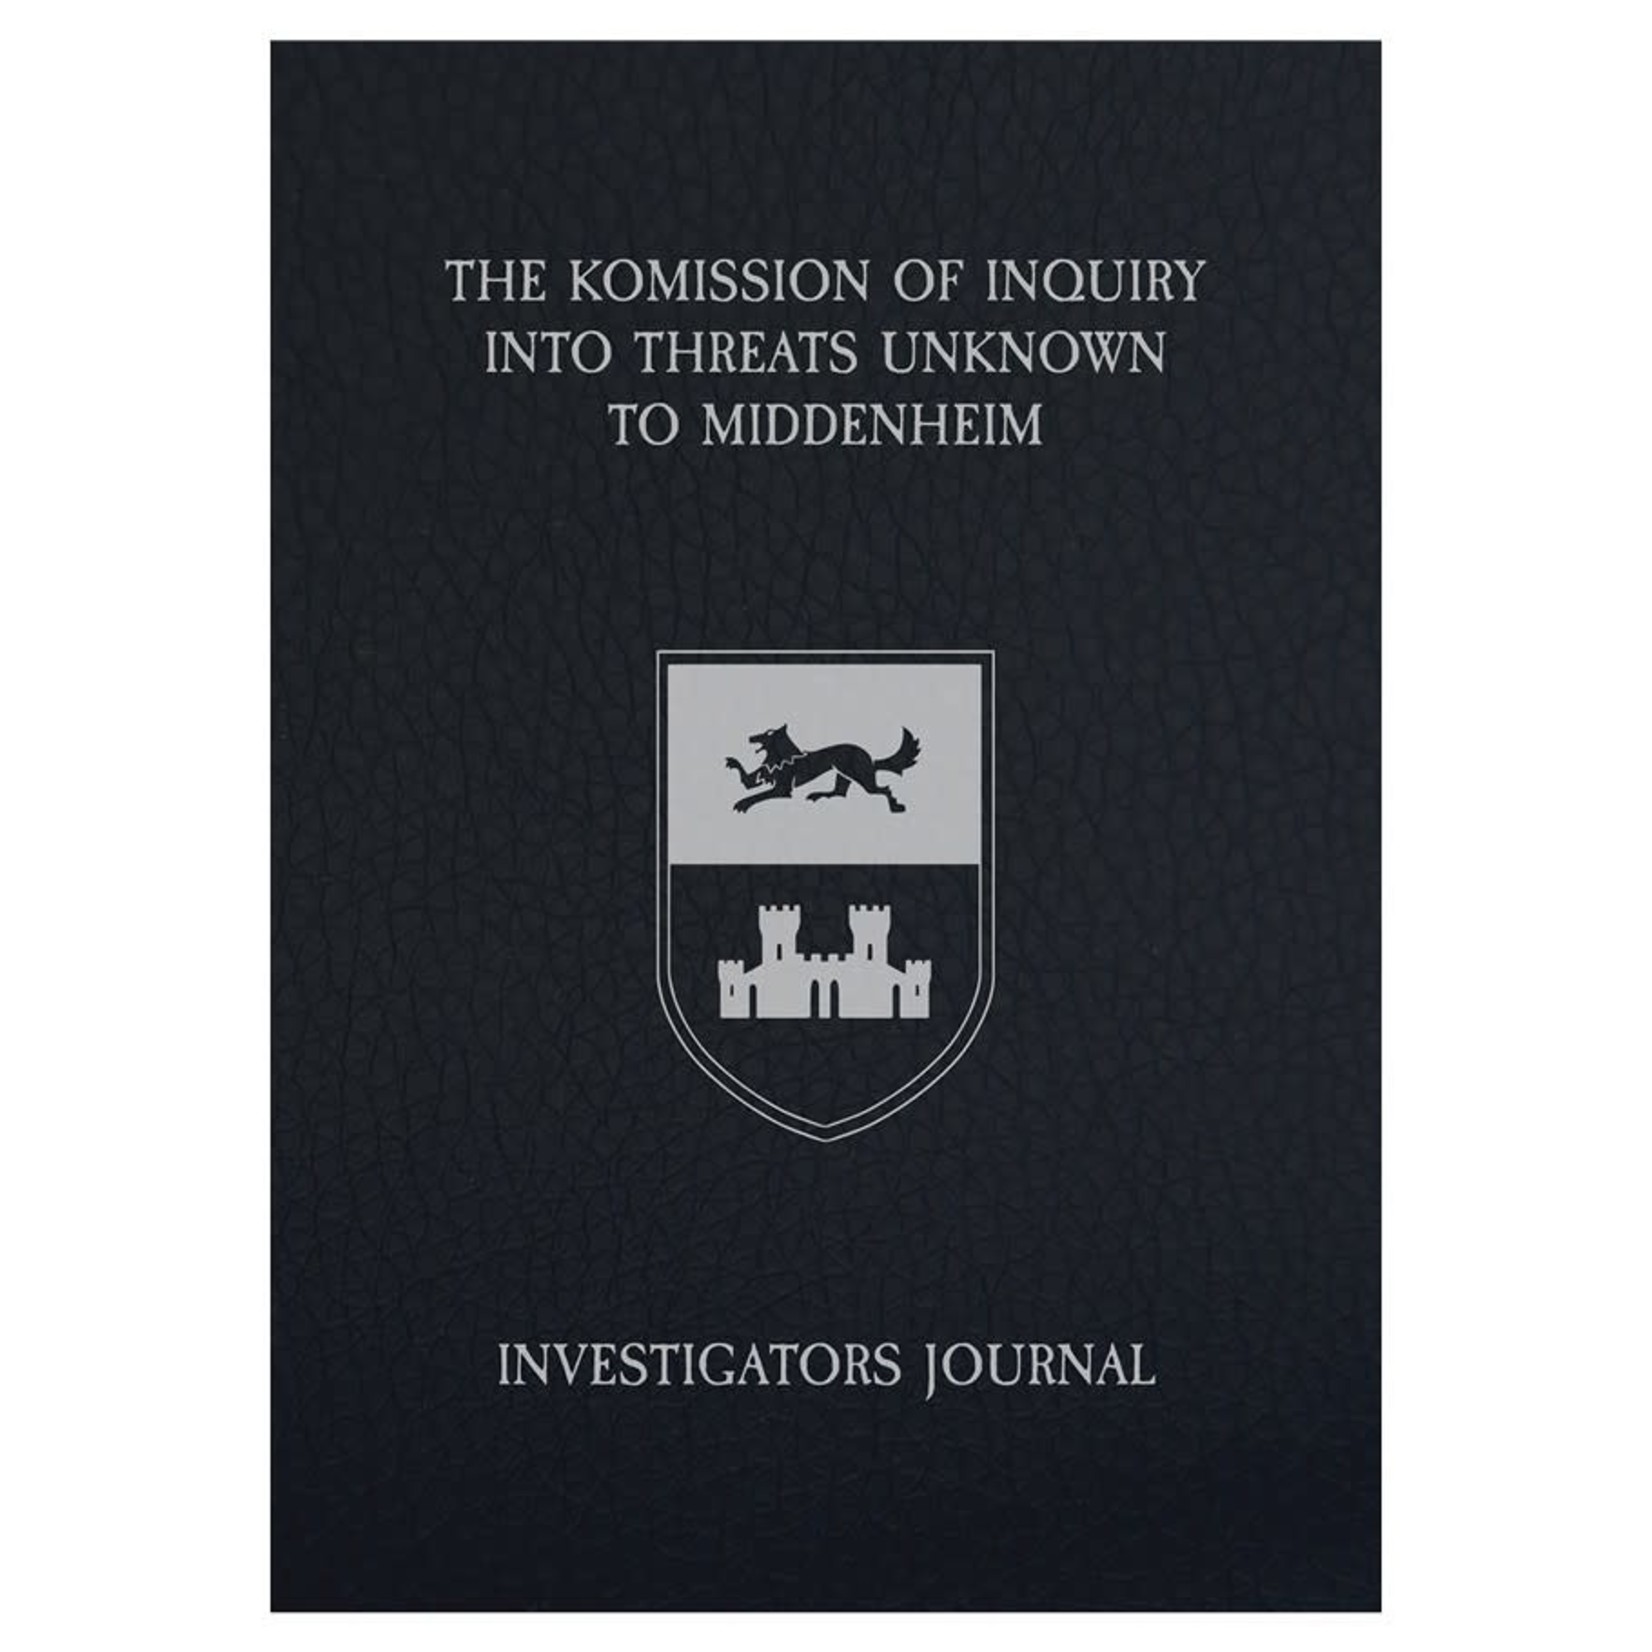 Cubicle 7 Warhammer Fantasy Roleplay: The Horned Rat Investigator's Journal